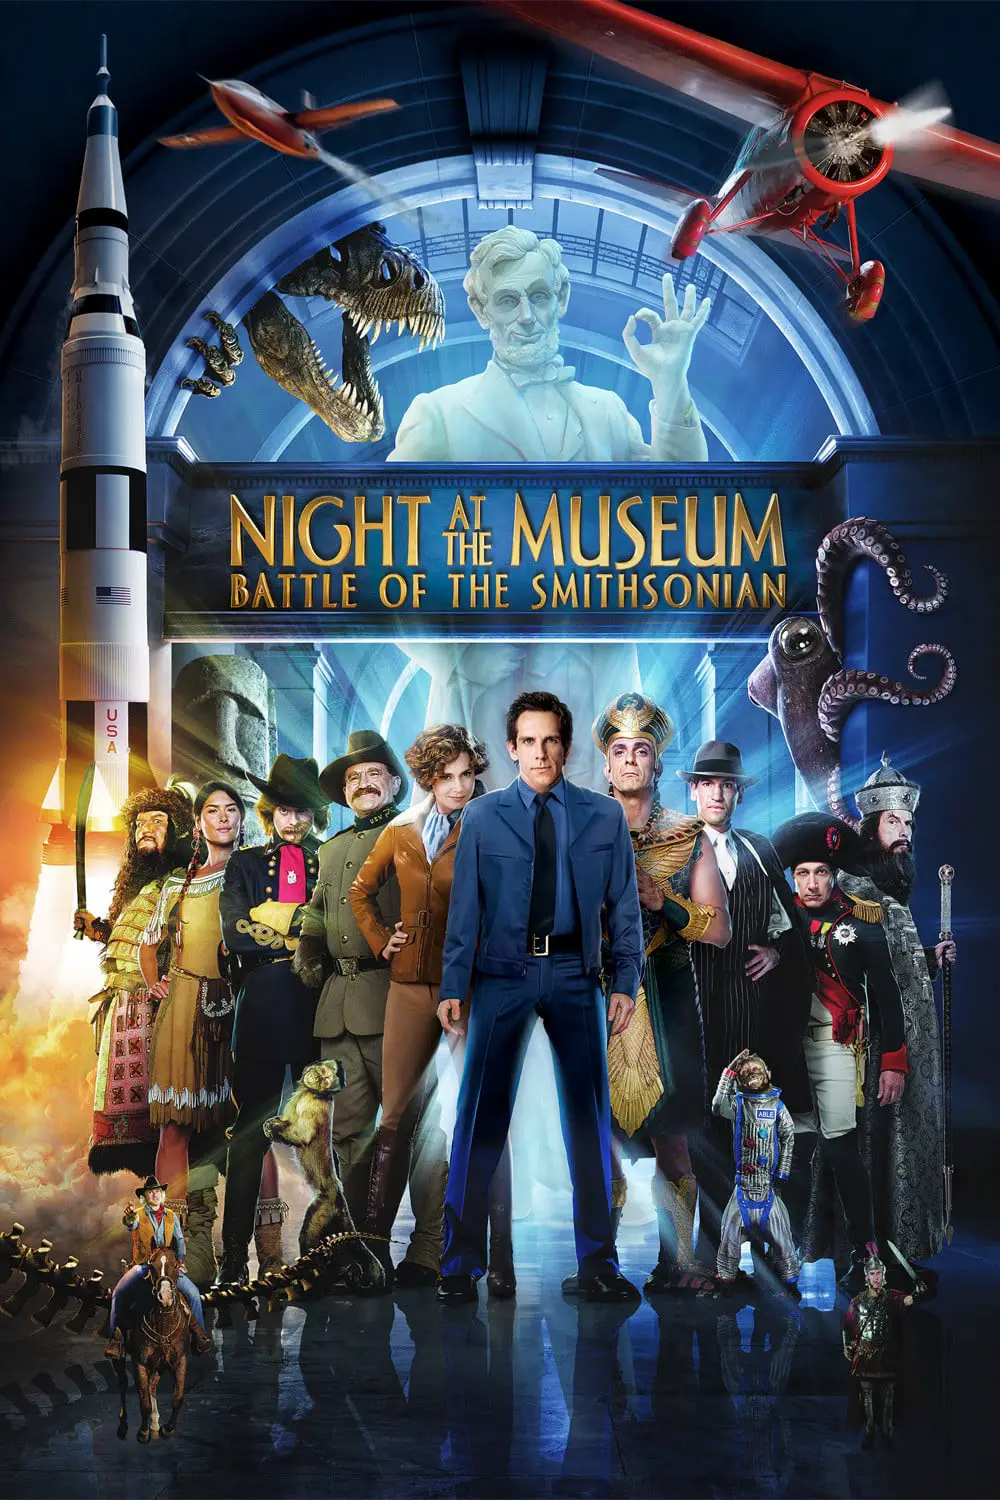 You are currently viewing Night at the Museum: Battle of the Smithsonian